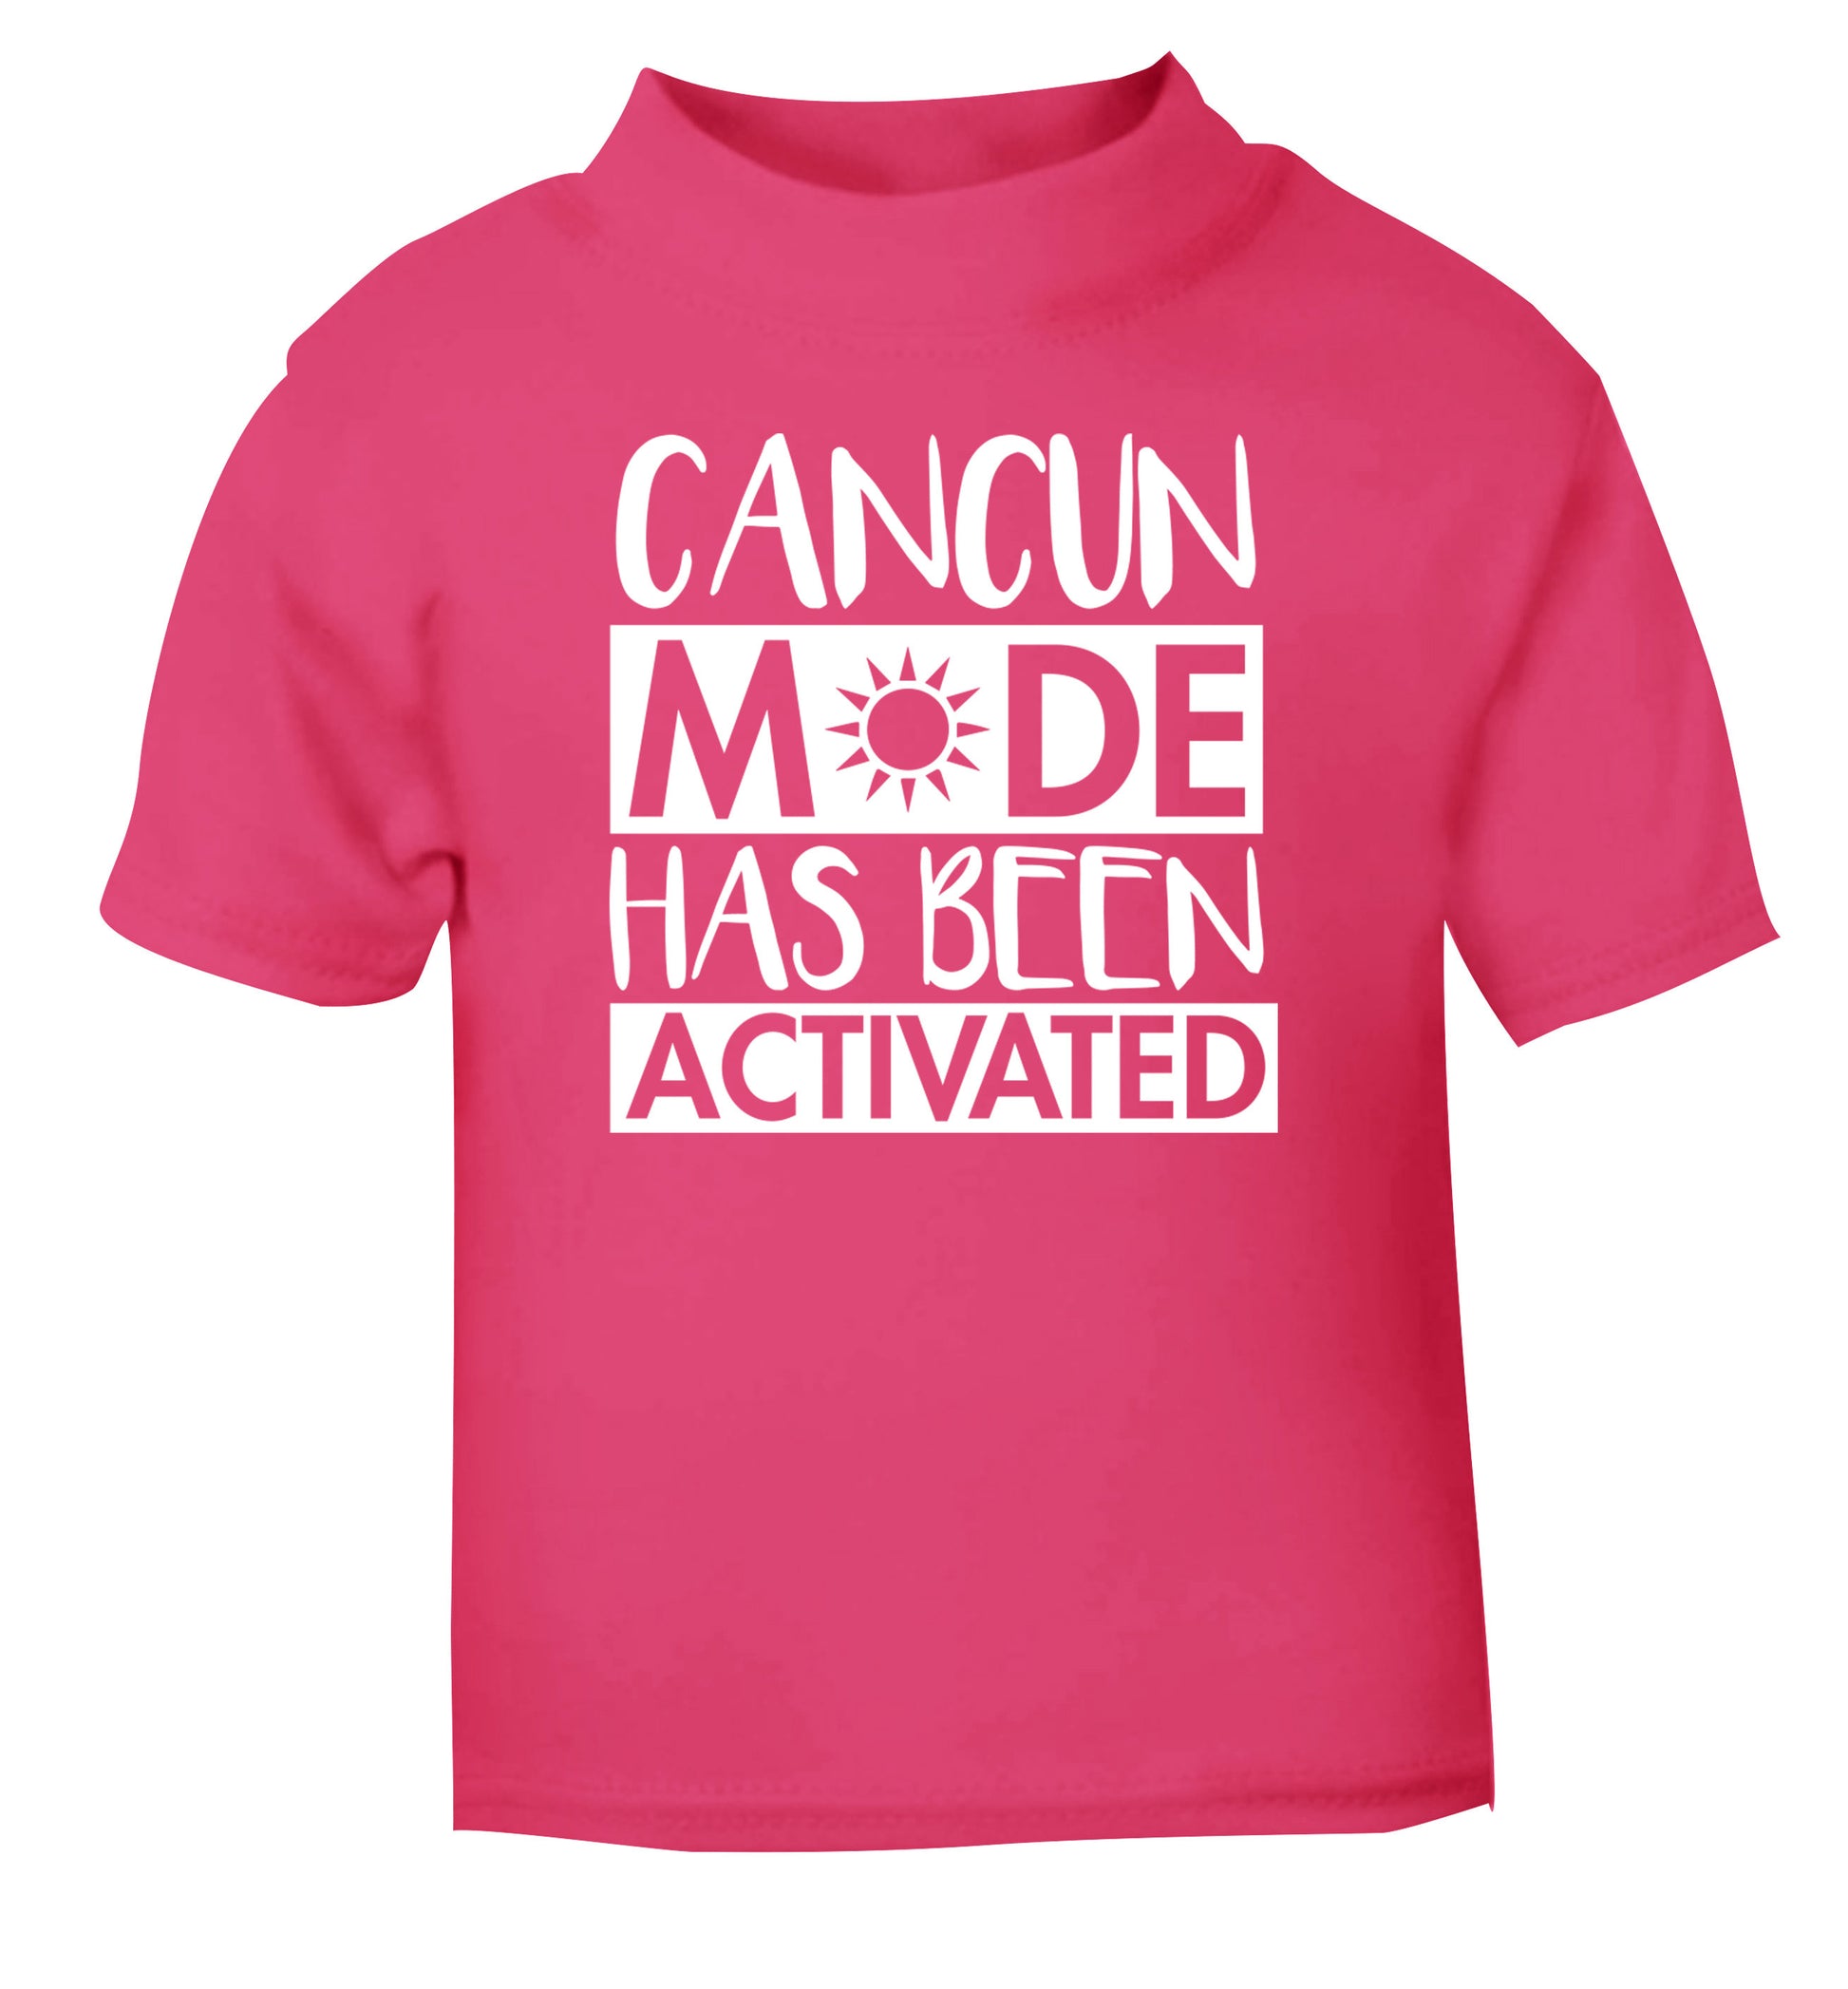 Cancun mode has been activated pink Baby Toddler Tshirt 2 Years